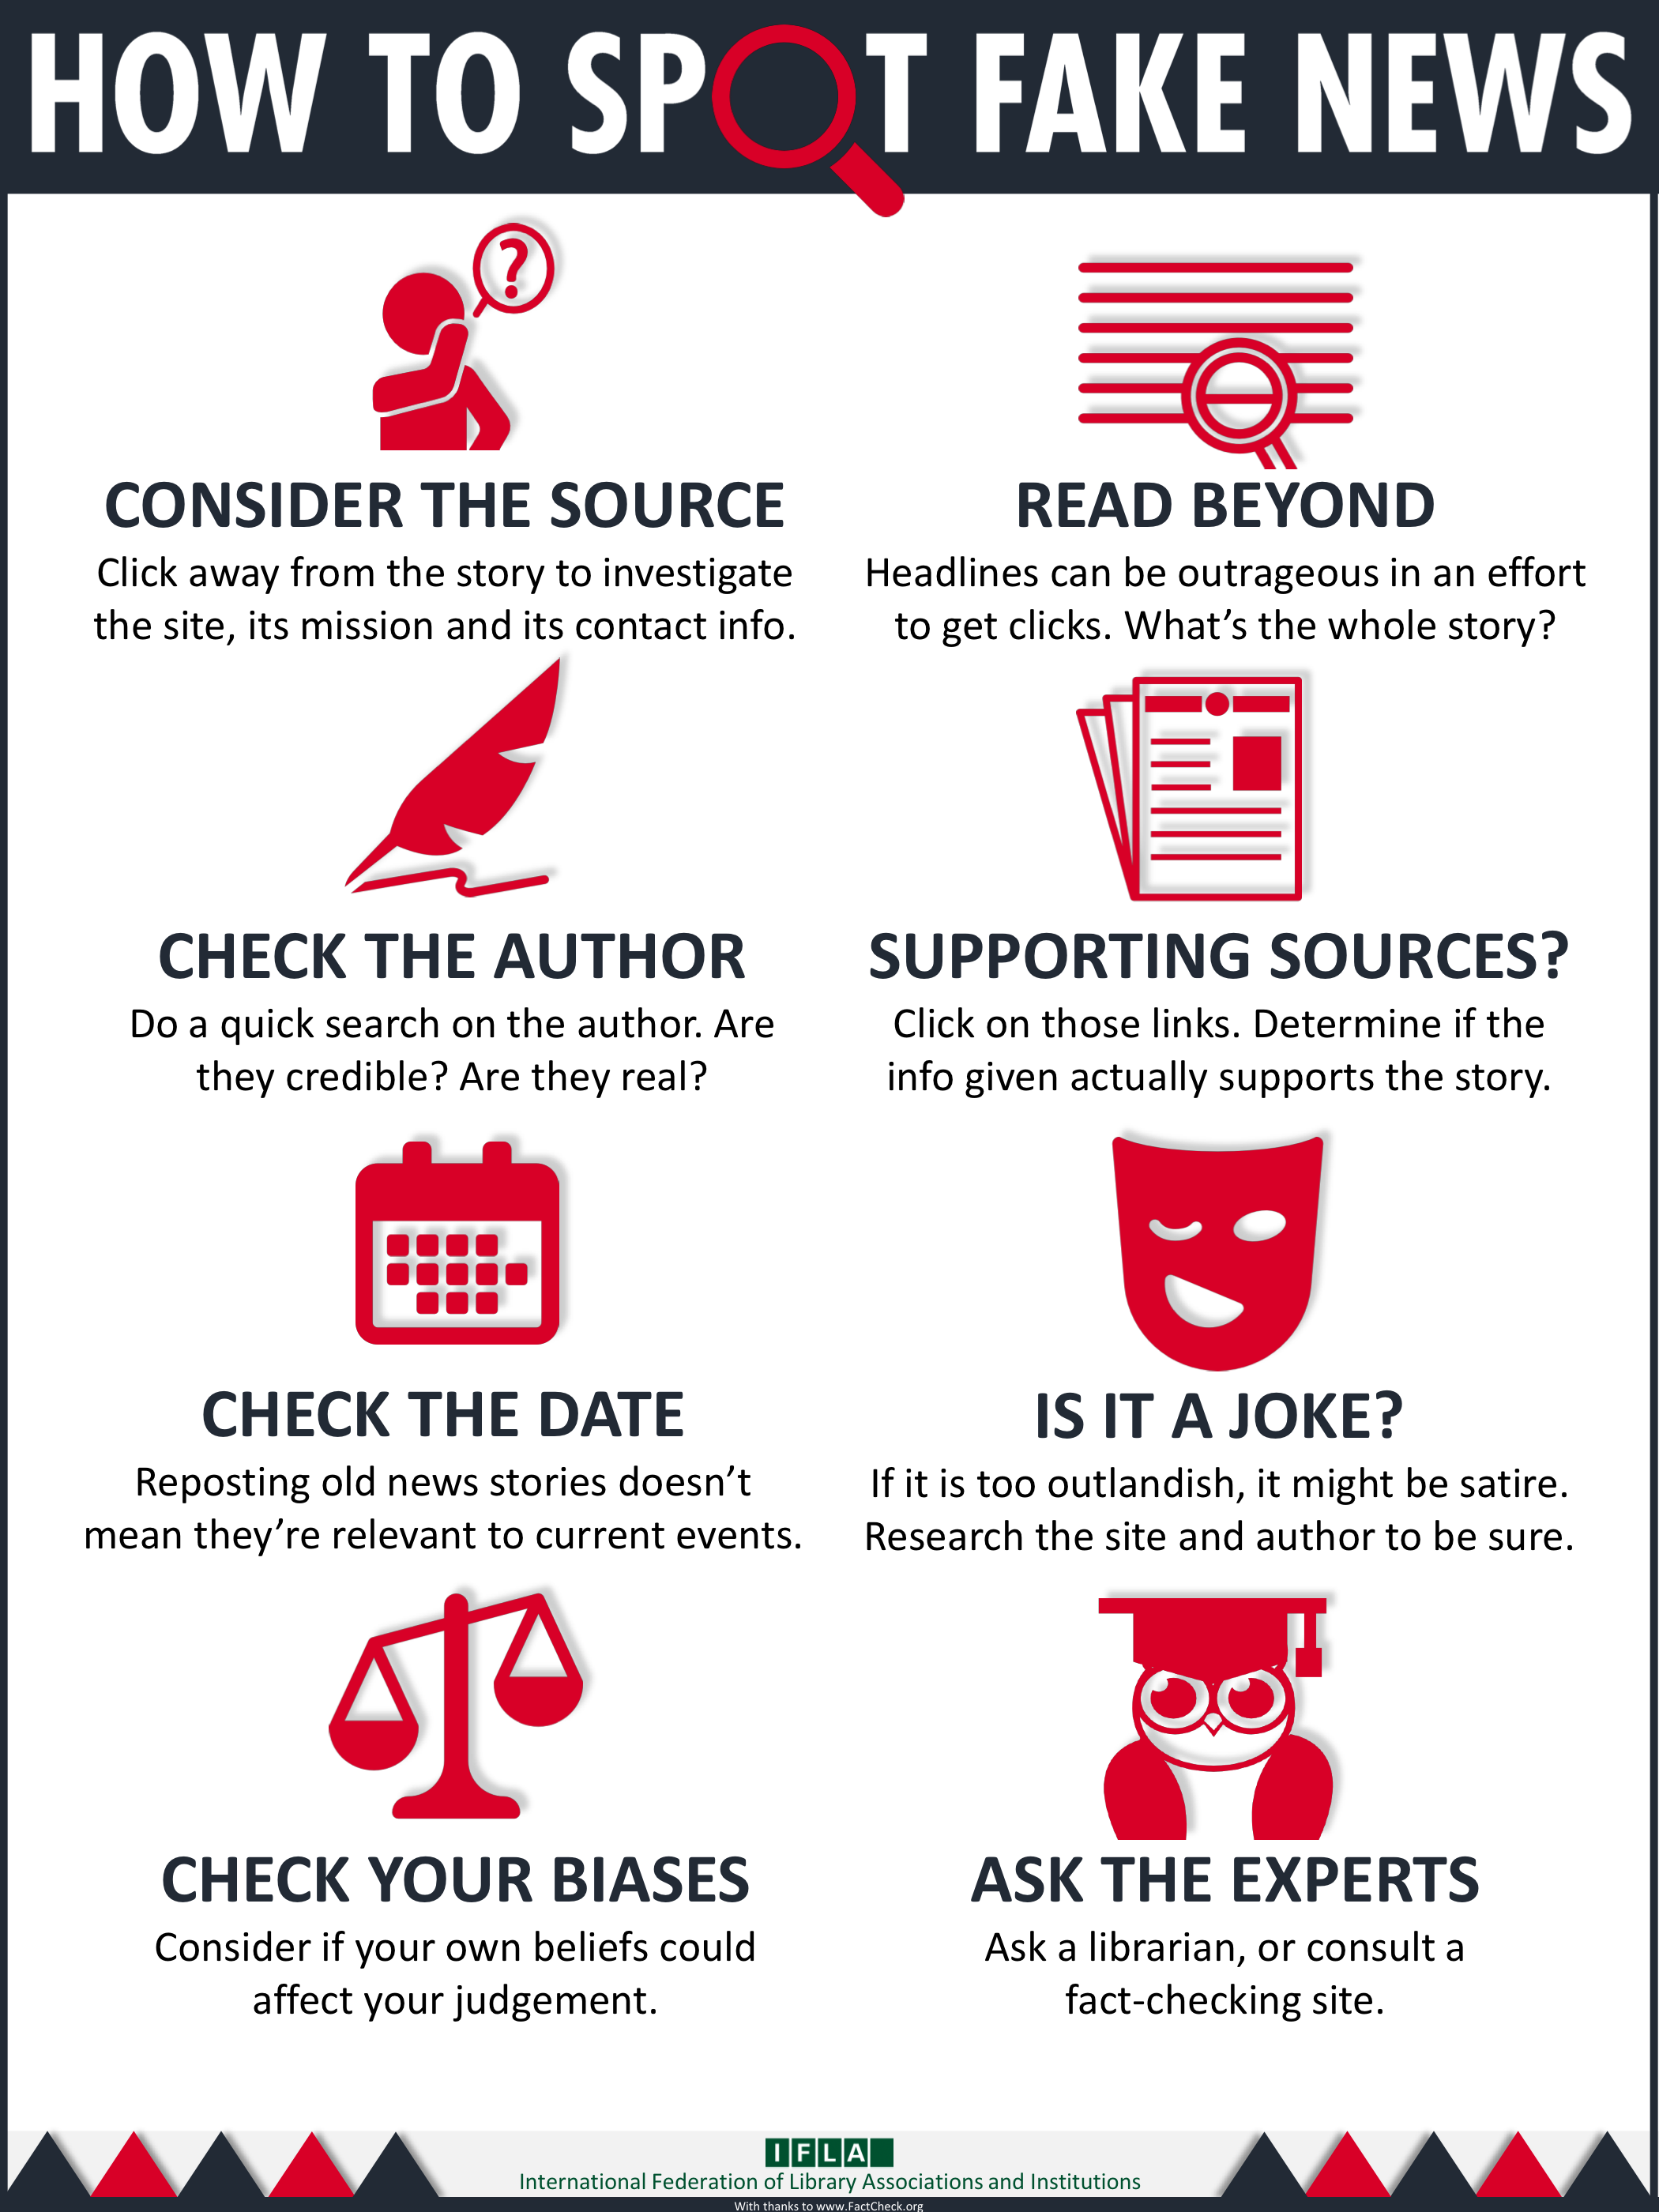 An info graphic about how to spot fake news.